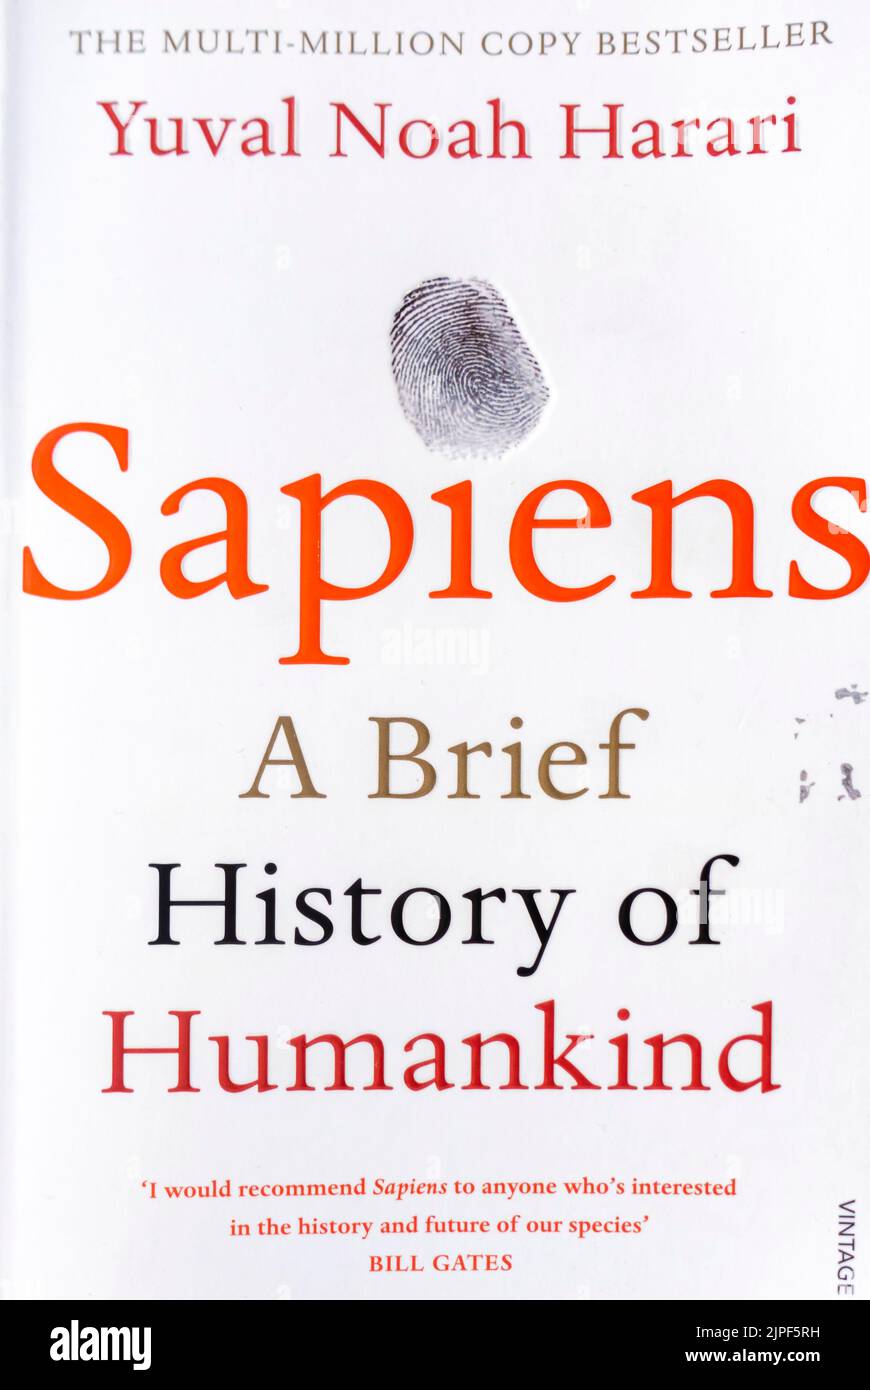 Sapiens: A Brief History of Humankind - Book by Yuval Noah Harari - 2011 - book cover Stock Photo